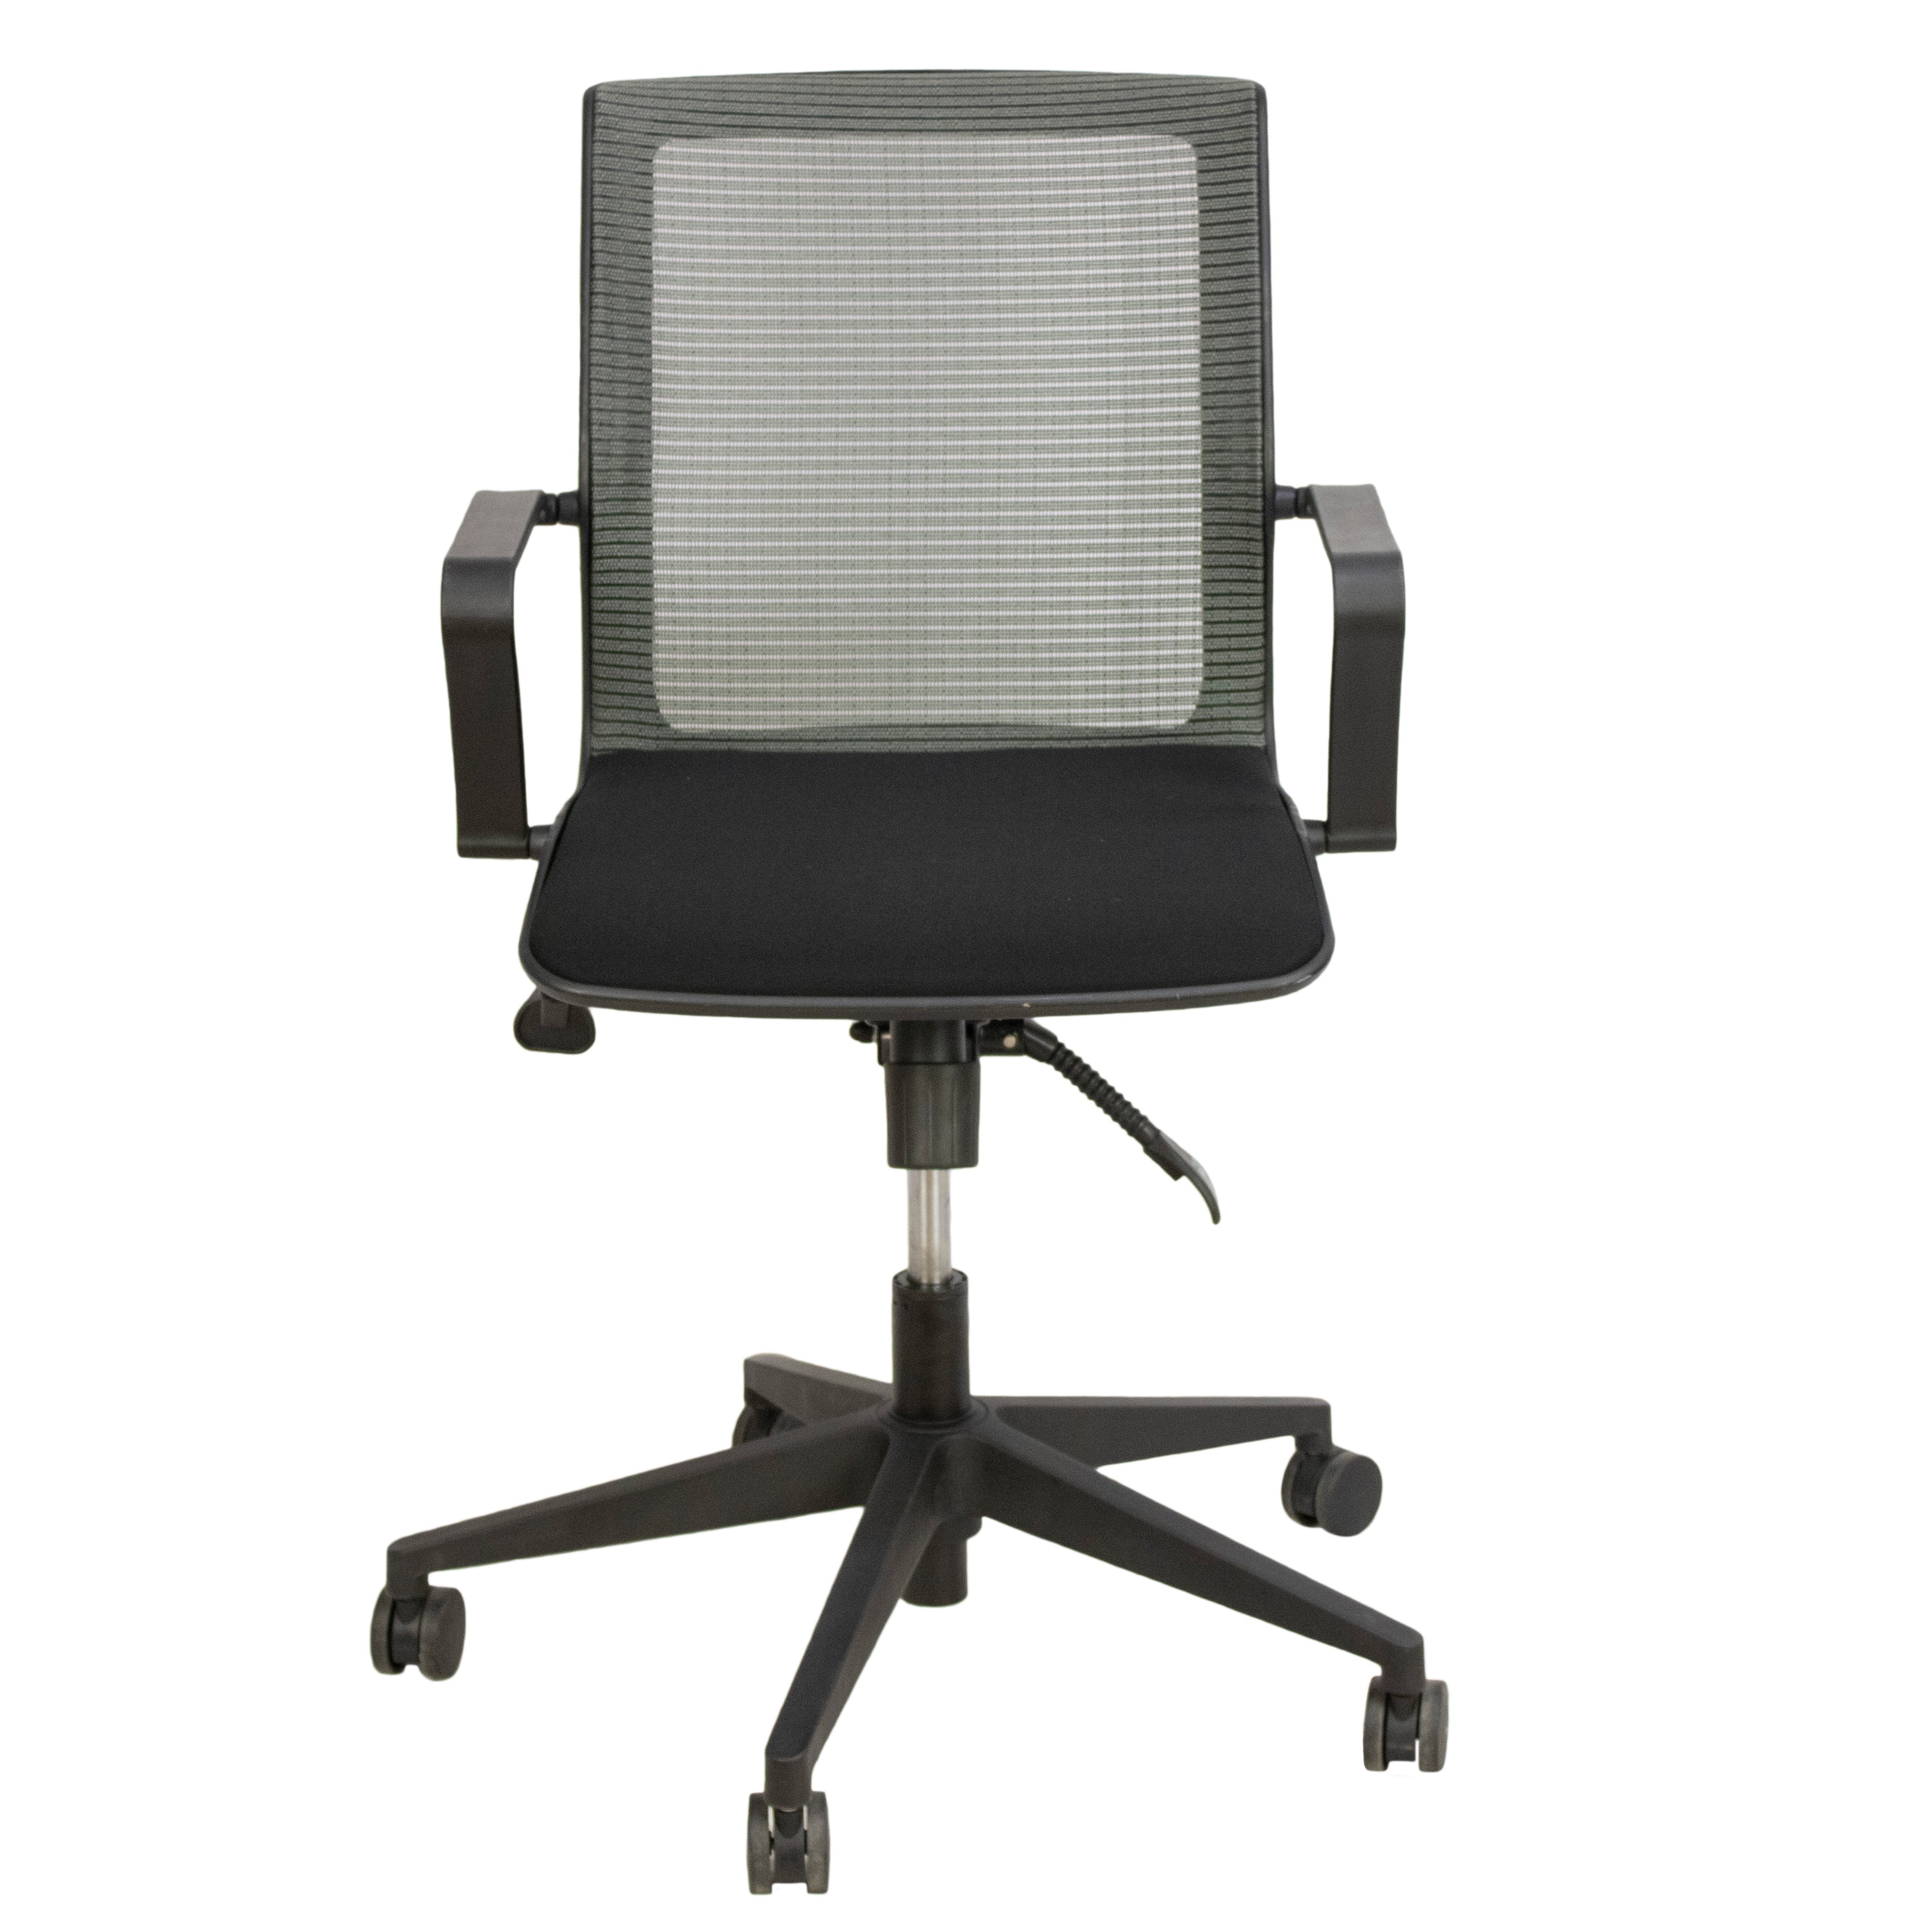 Teal Mesh 2 Function Task Chair - Preowned